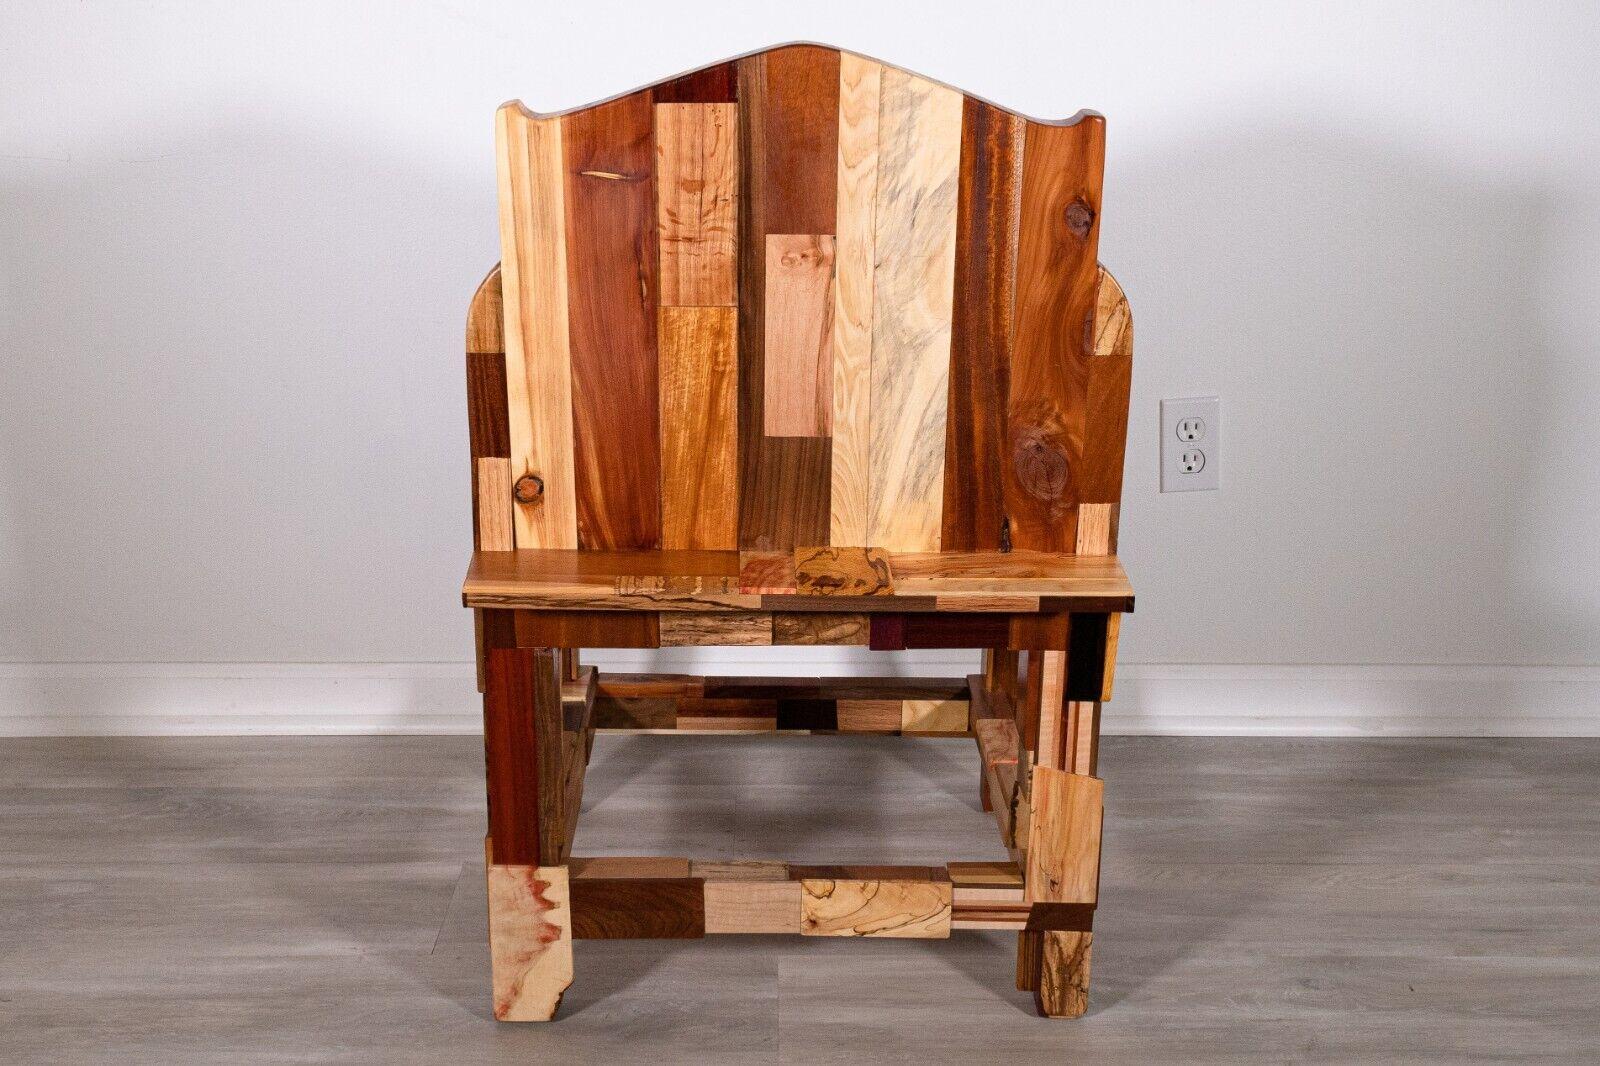 Myriad of Assorted Wood Handcrafted Custom Studio Chair Signed by Artist 2020 In Good Condition In Keego Harbor, MI